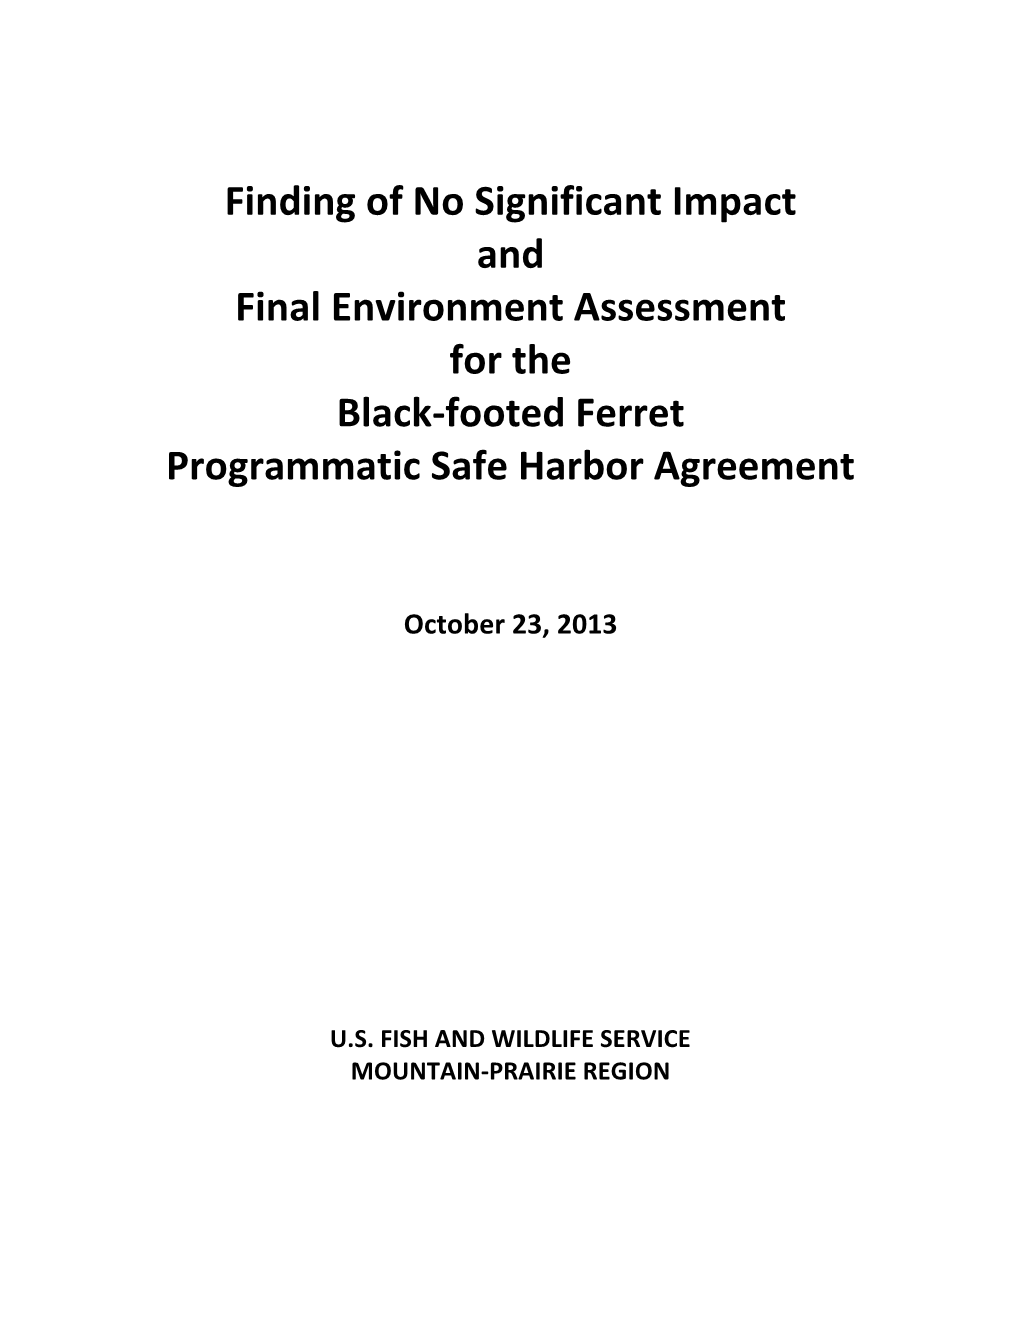 Finding of No Significant Impact and Final Environment Assessment for the Black-Footed Ferret Programmatic Safe Harbor Agreement